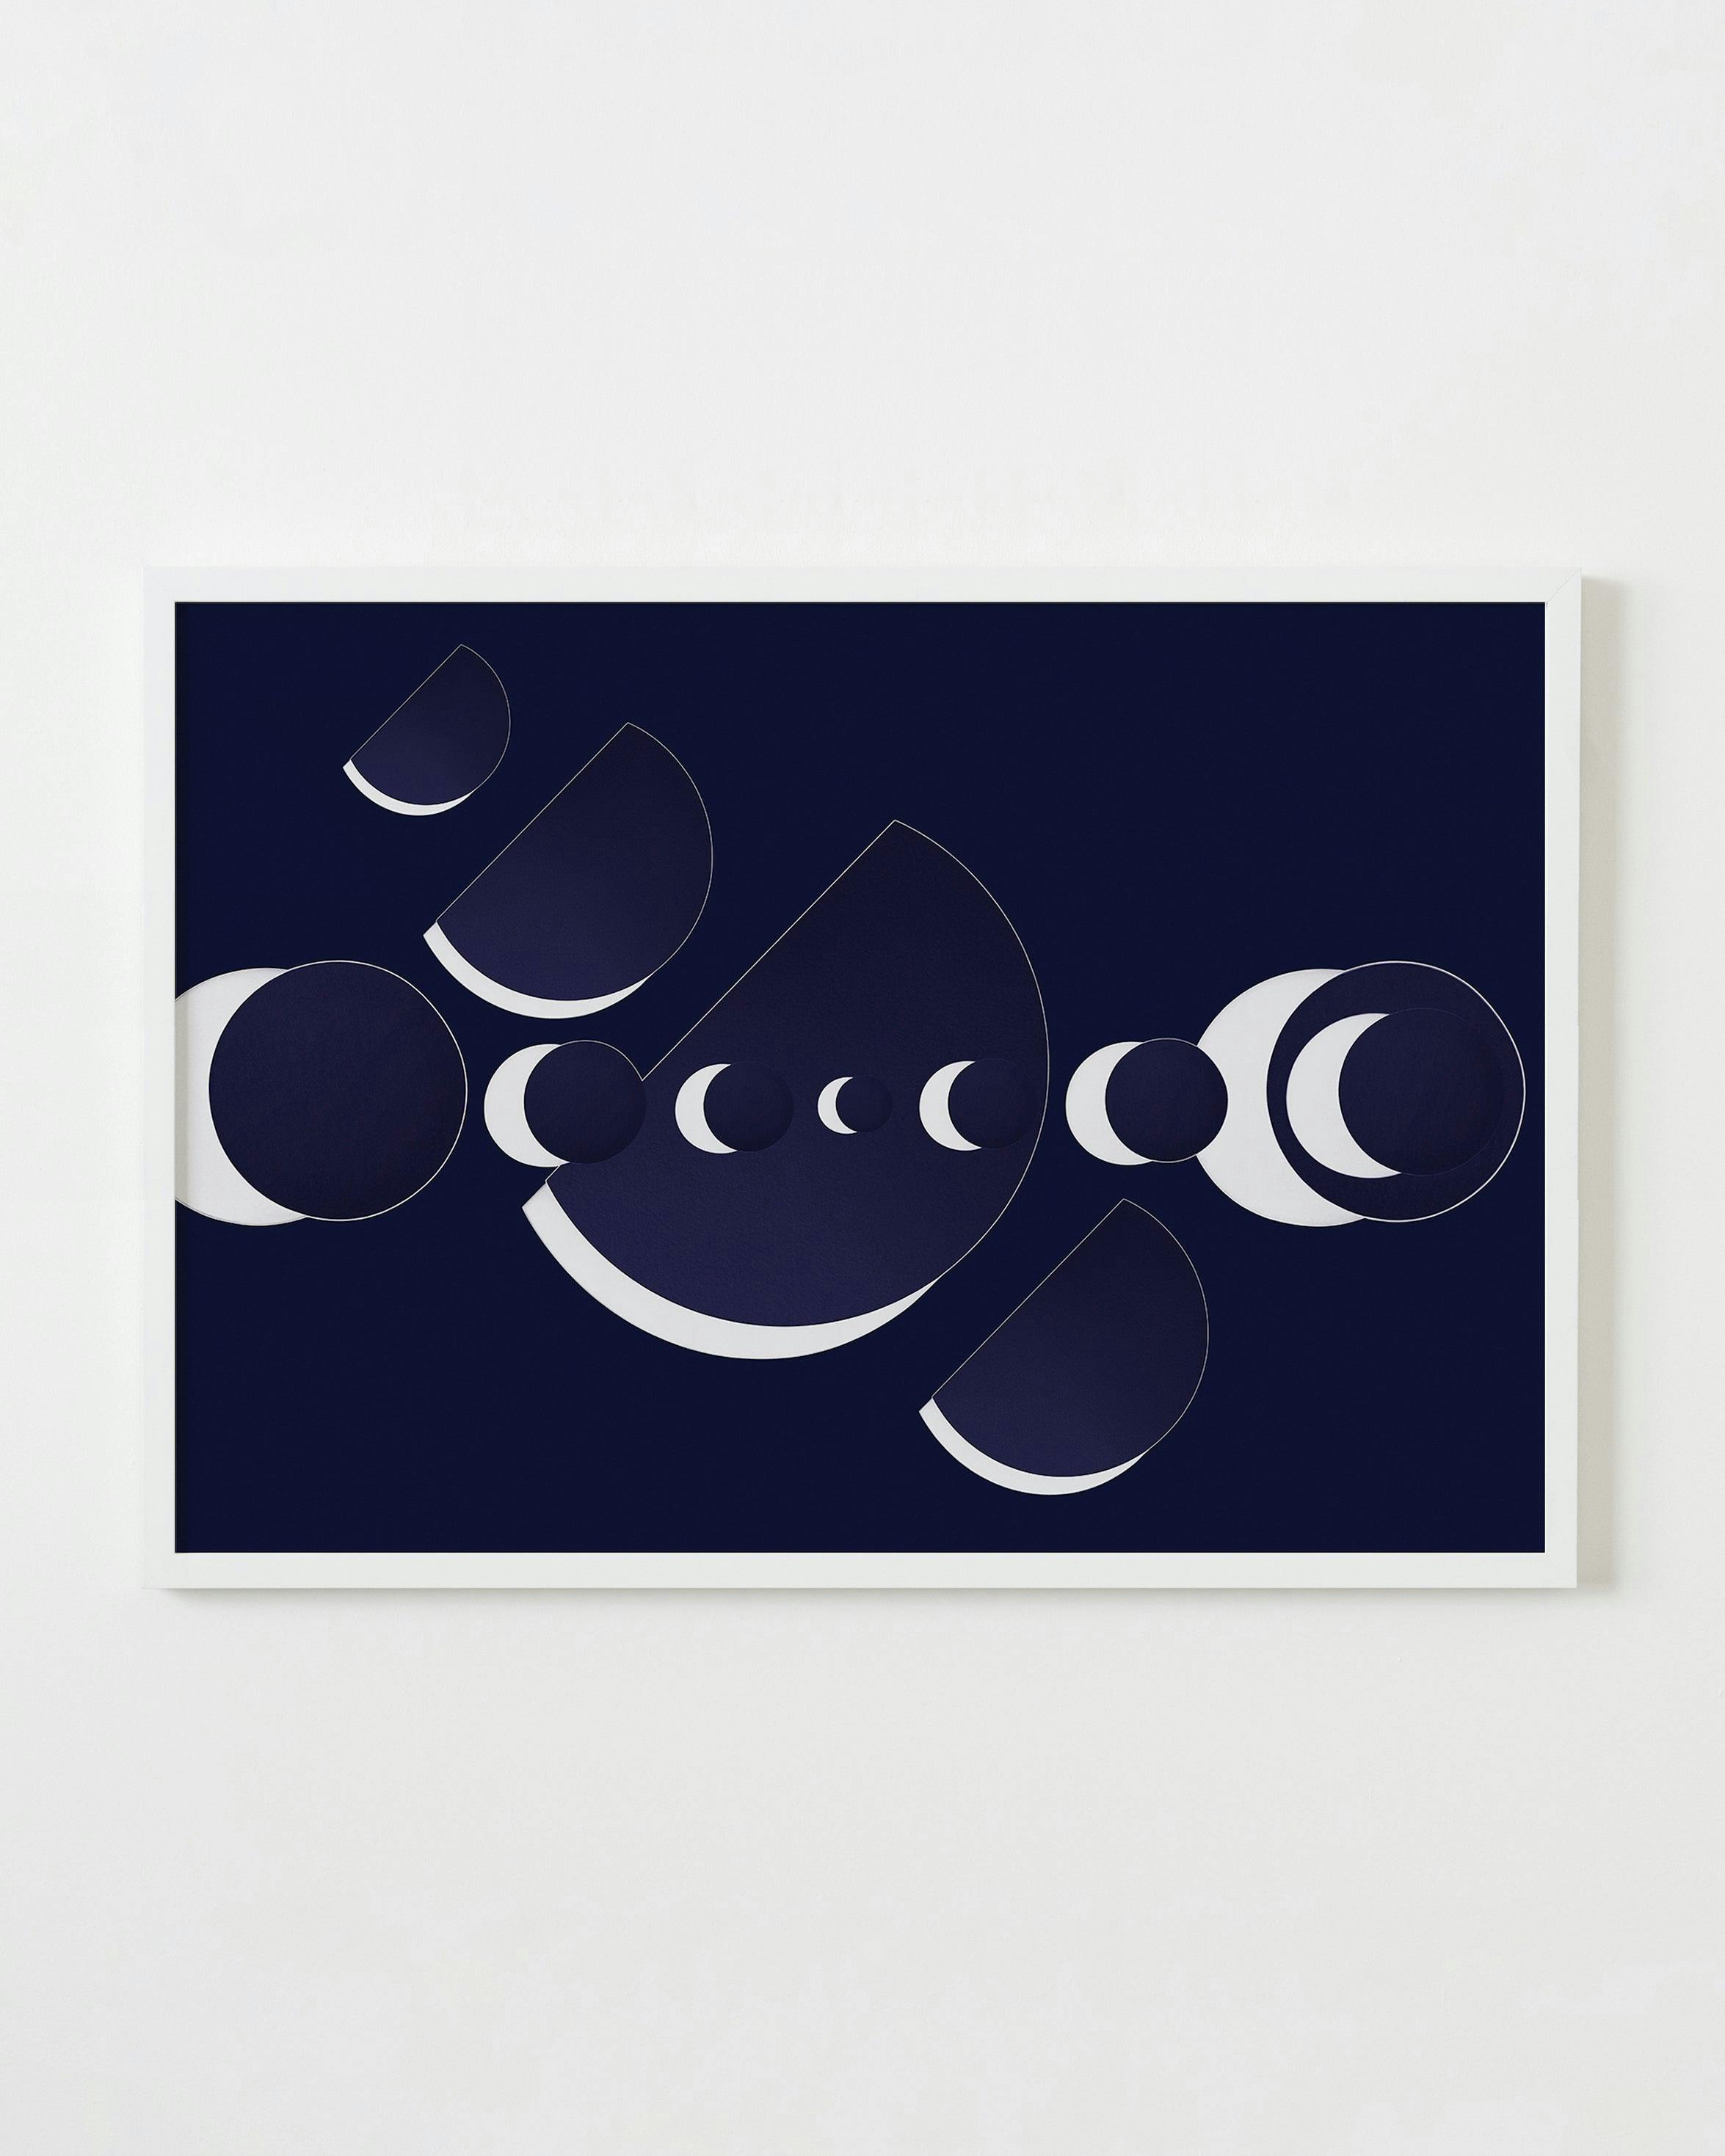 Print by Martina Lang titled "Space Oddity Night".